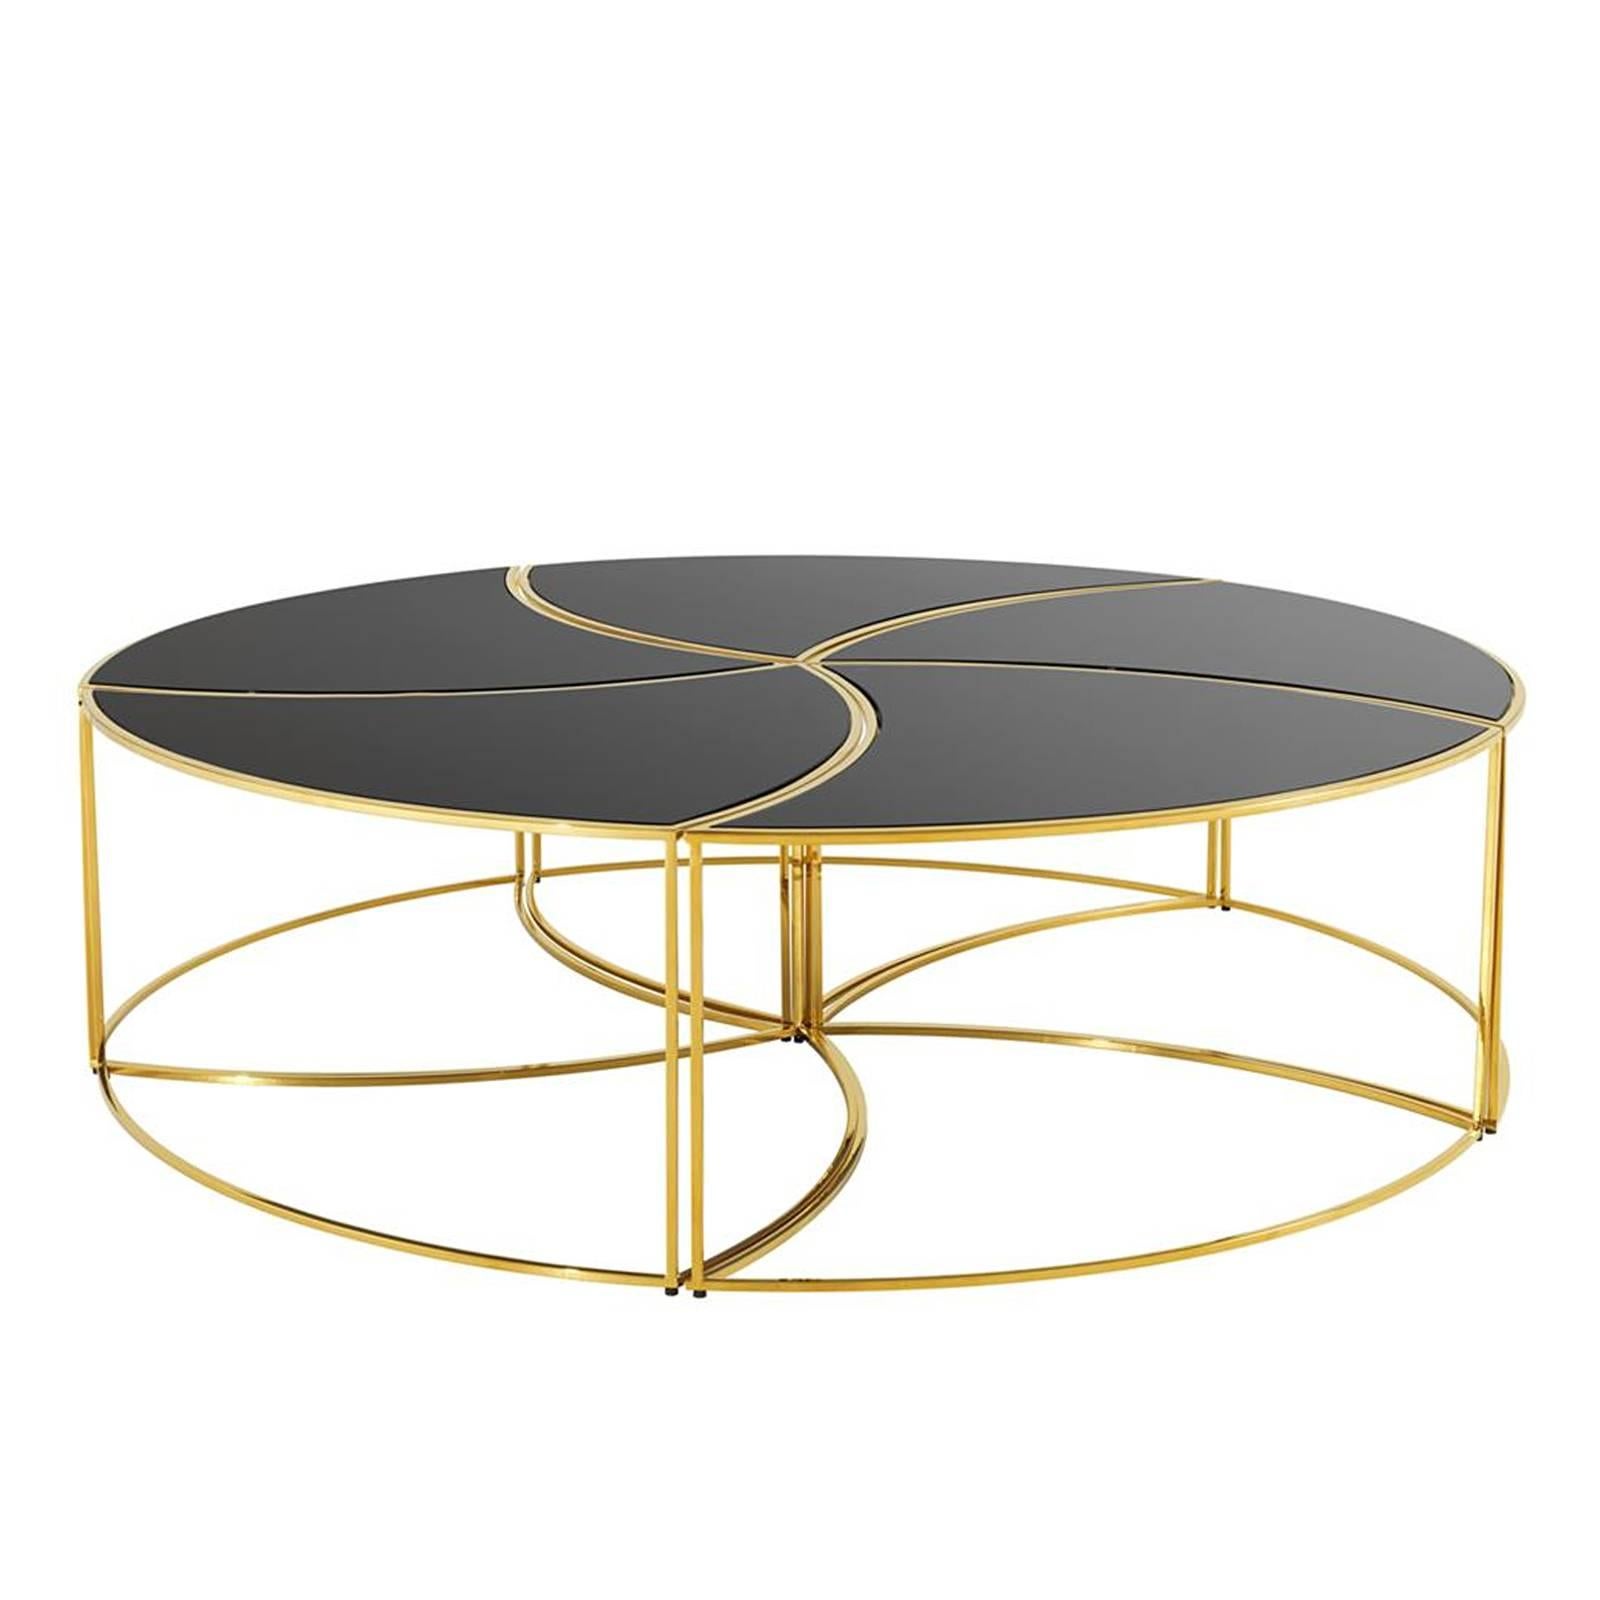 Helix Coffee Table Set of Five in Gold Finish